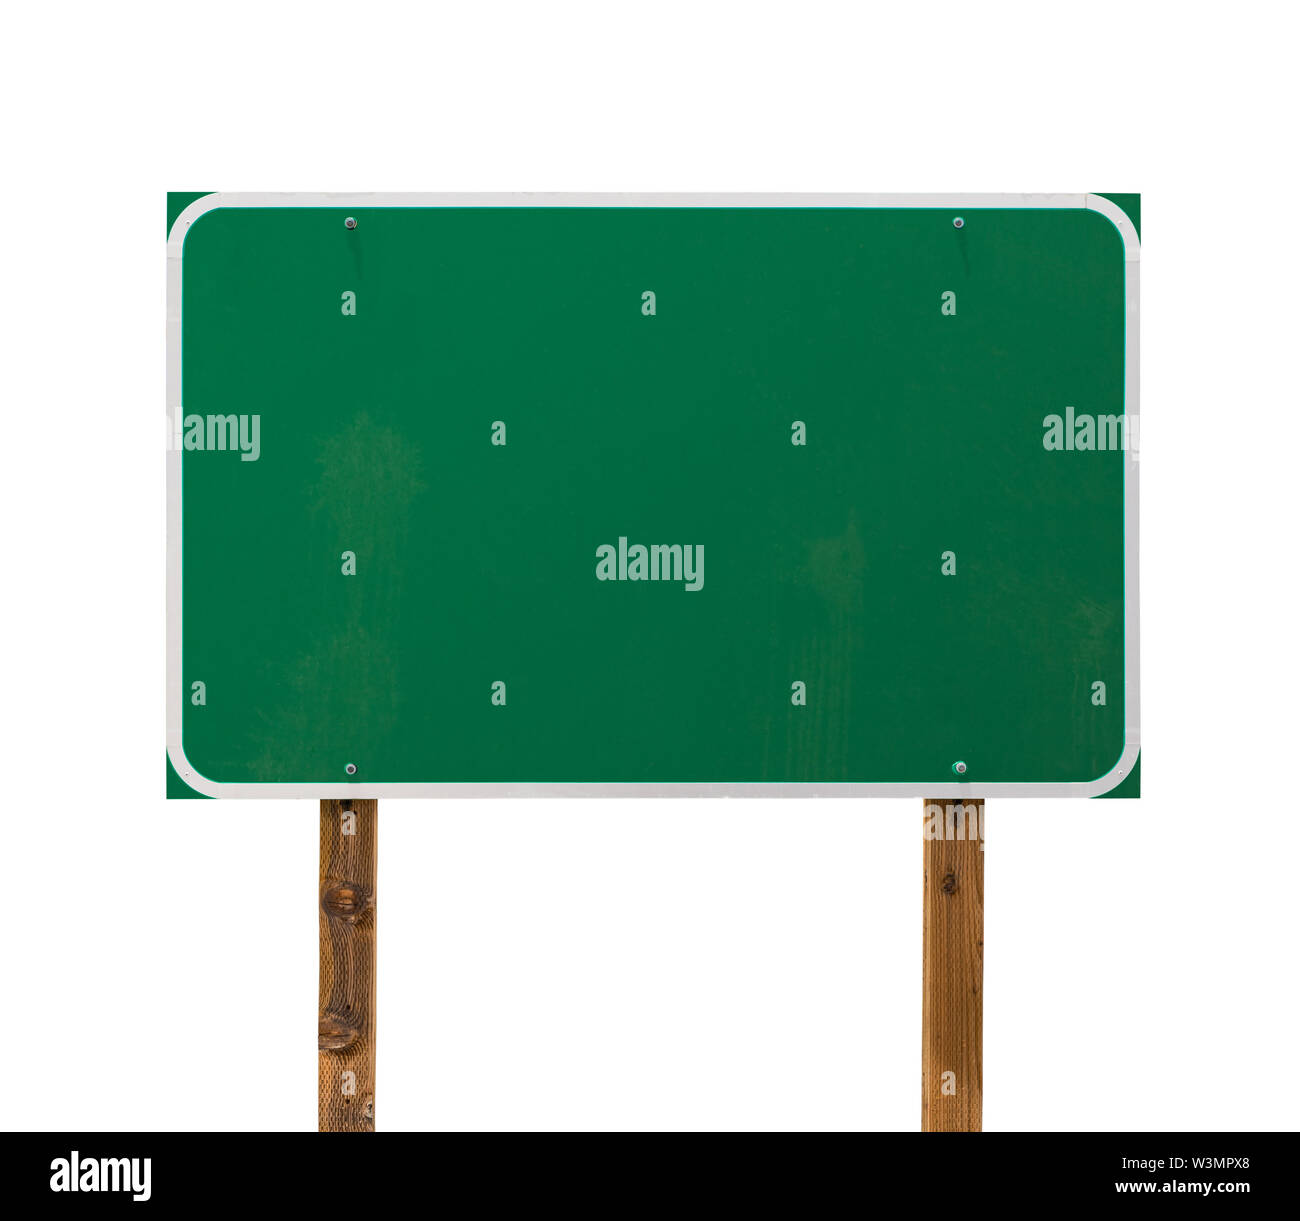 Blank Green Road Sign with Wooden Posts Isolated on a White Background. Stock Photo